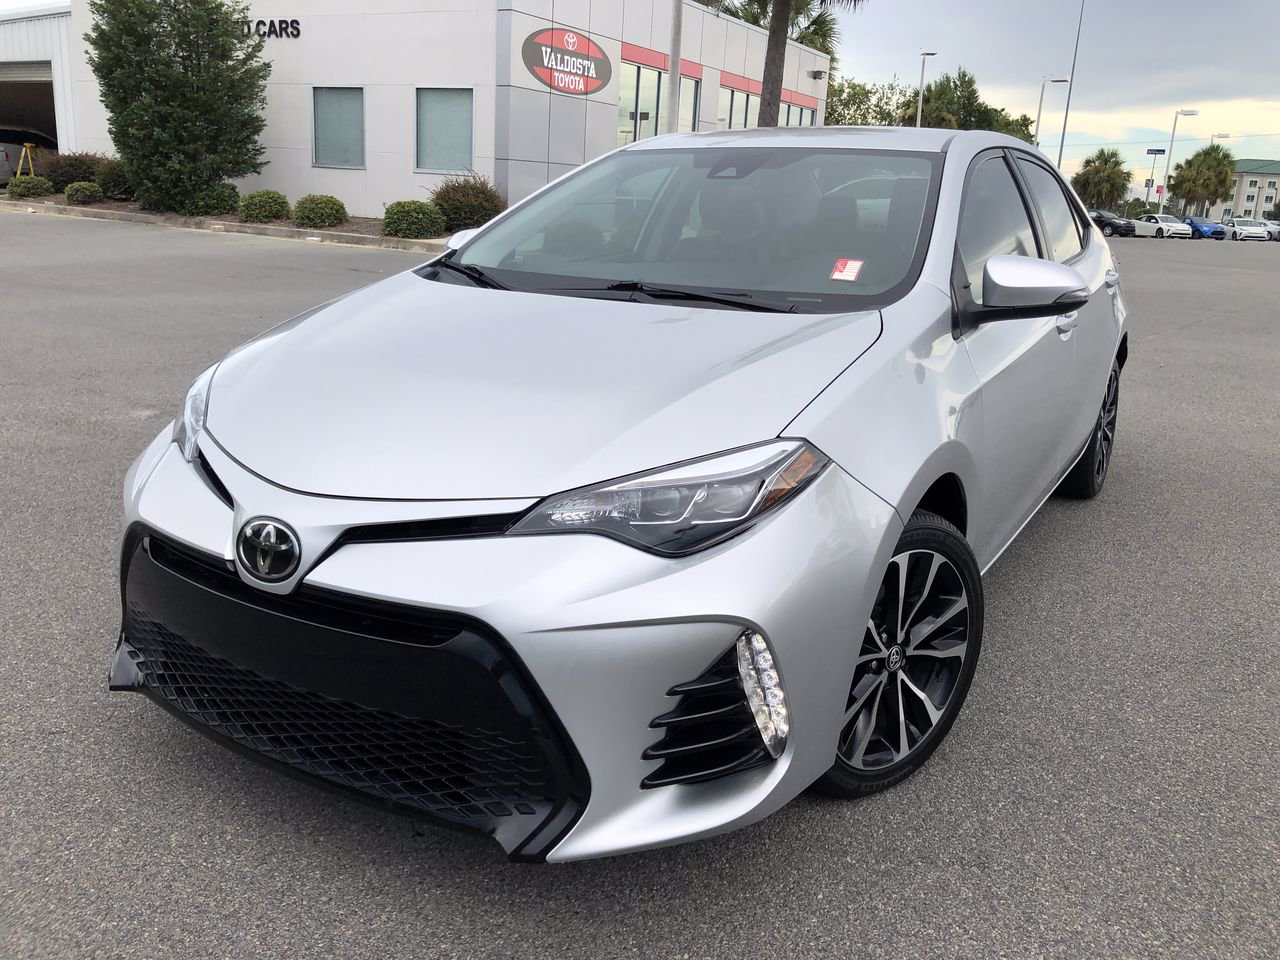 Certified Pre-Owned 2018 Toyota Corolla SE 4dr Car in Valdsota #220200A